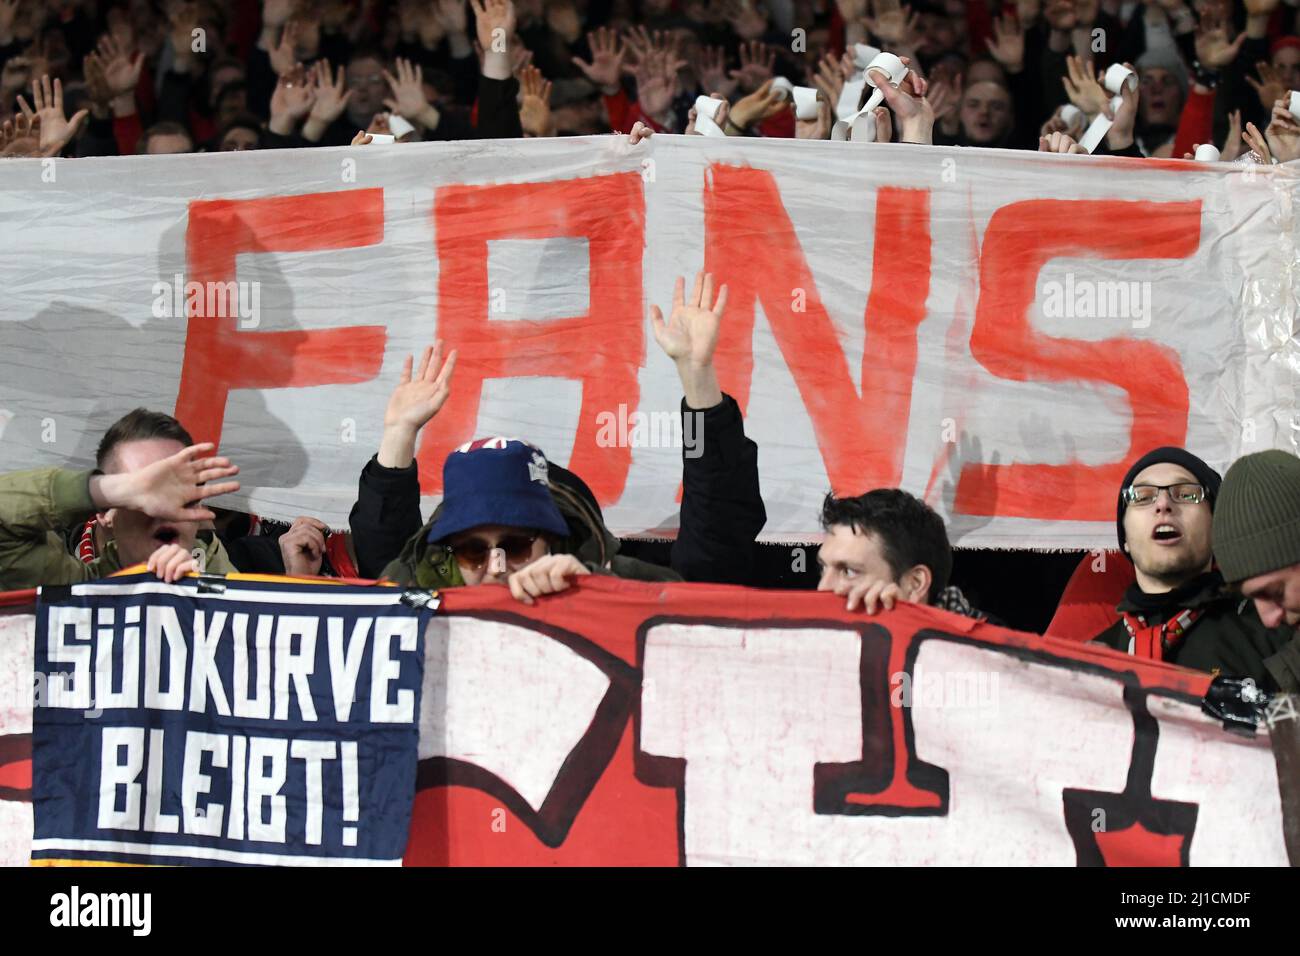 LONDON, ENGLAND - MARCH 7, 2017: Bayern ultras display a banner during the second leg of the UEFA Champions League Round of 16 game between Arsenal FC and Bayern Munchen at Emirates Stadium. Copyright: Cosmin Iftode/Picstaff Stock Photo